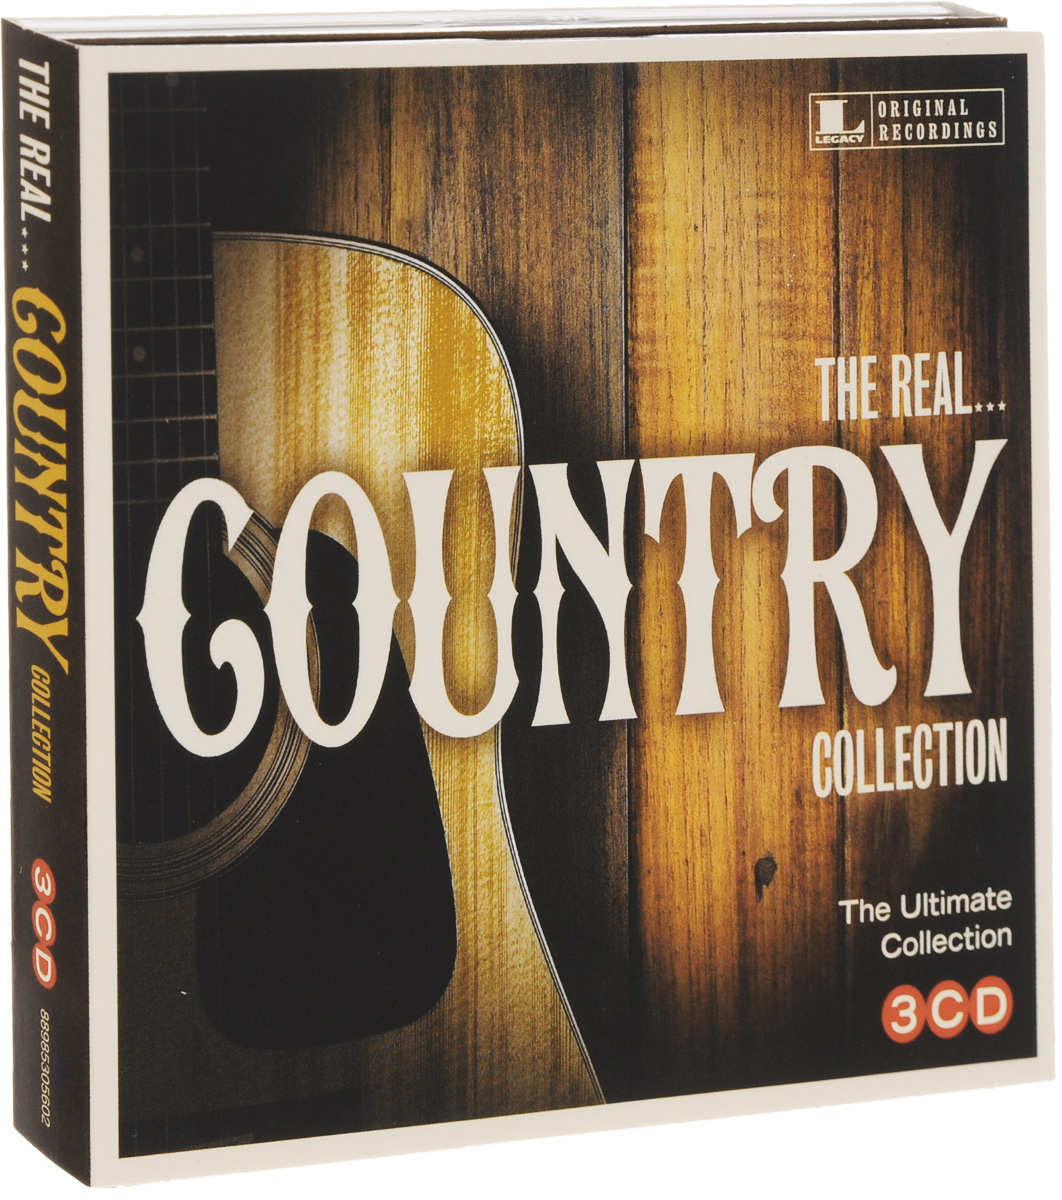 The Real…Country Collection (3 CD)